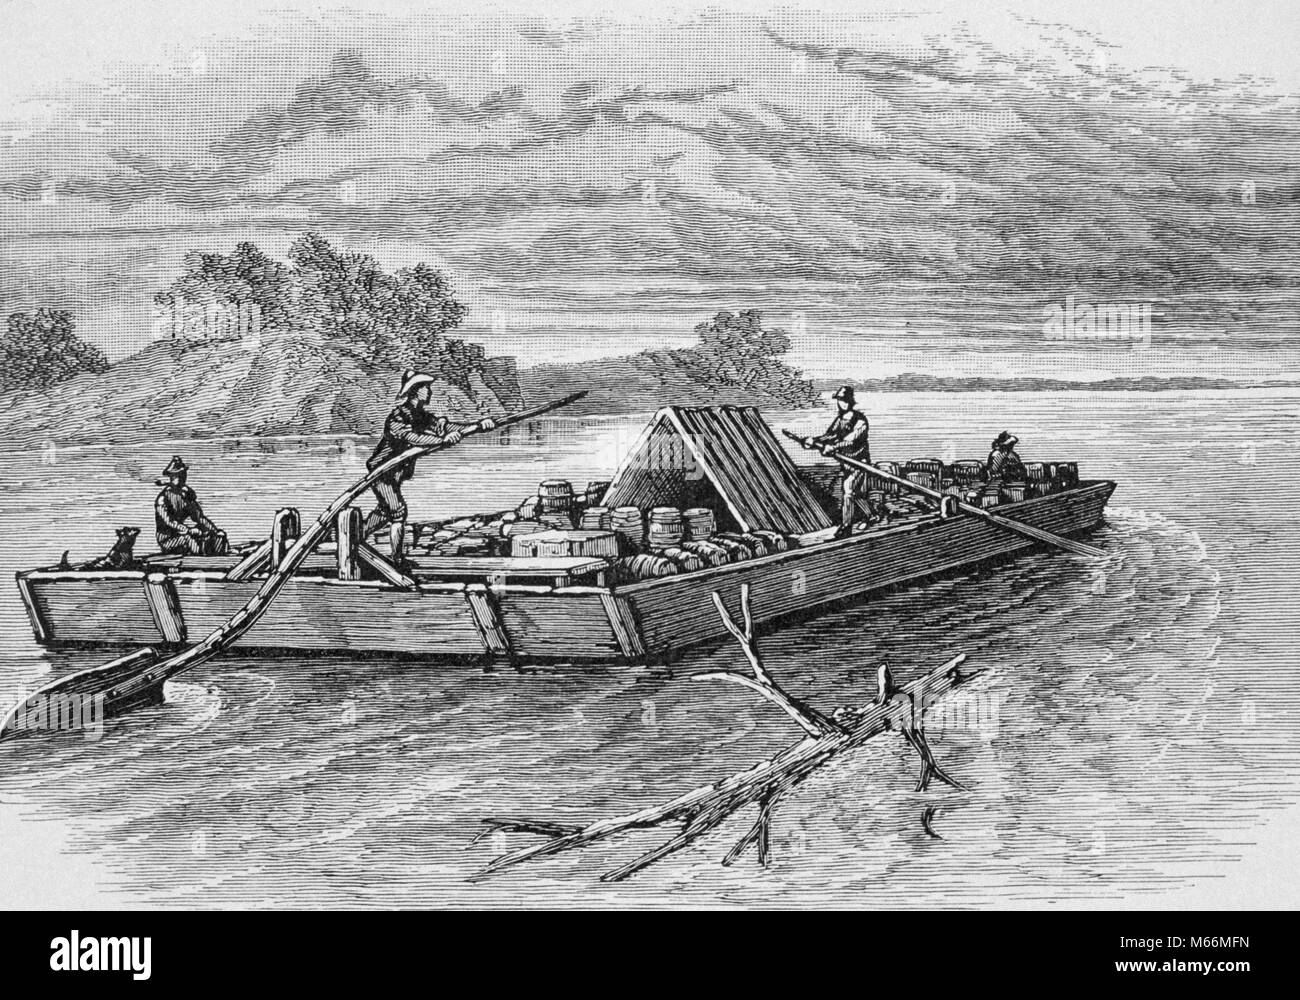 1800s FLATBOAT CARRYING BARRELS OF CARGO AND GOODS GOING DOWN MISSISSIPPI RIVER USA - kh13521 NAW001 HARS GOODS LOG STRENGTH COURAGE AND POWERFUL INNOVATION OPPORTUNITY COOPERATION SMALL GROUP OF PEOPLE COMMERCE LUMBER MID-ADULT MID-ADULT MAN SWEEP B&W BARRELS BLACK AND WHITE BOATMAN BOATMEN FLAT BOATMEN FLAT-BOTTOMED FLATBOAT MISSISSIPPI OCCUPATIONS OLD FASHIONED ONE-WAY TILLER TRADERS VESSEL Stock Photo